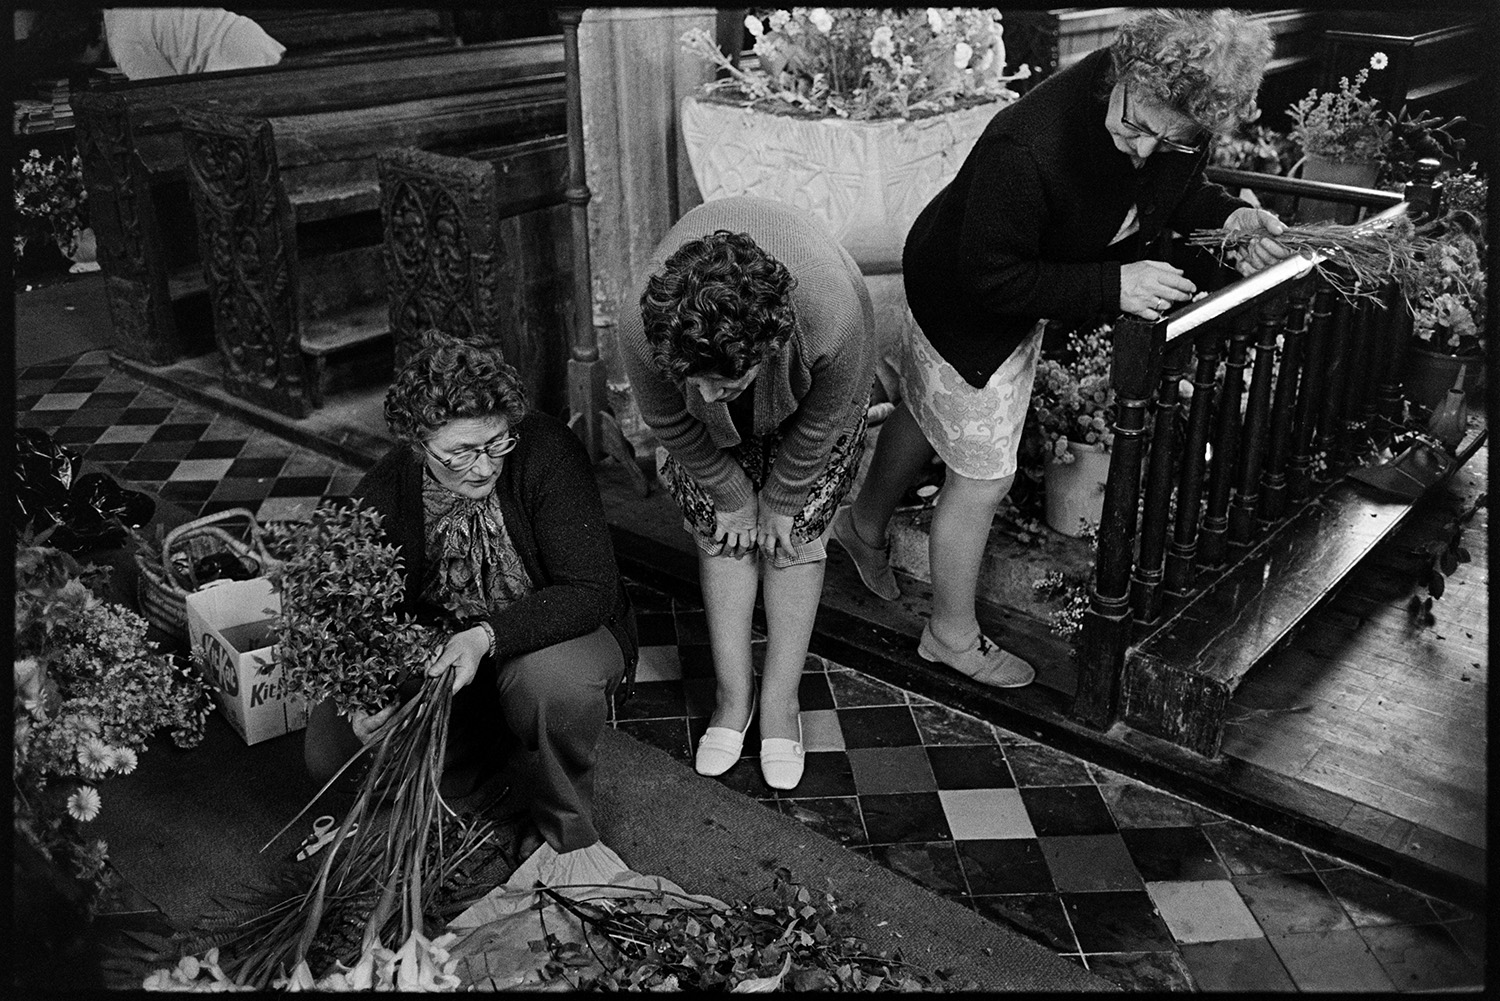 Women decorating church with flowers for Jubilee. Graveyard. 
[Three women decorating High Bickington Church with flowers for Queen Elizabeth II Silver Jubilee. Carved wooden pews can be seen as well as a Norman font with a flower display.]